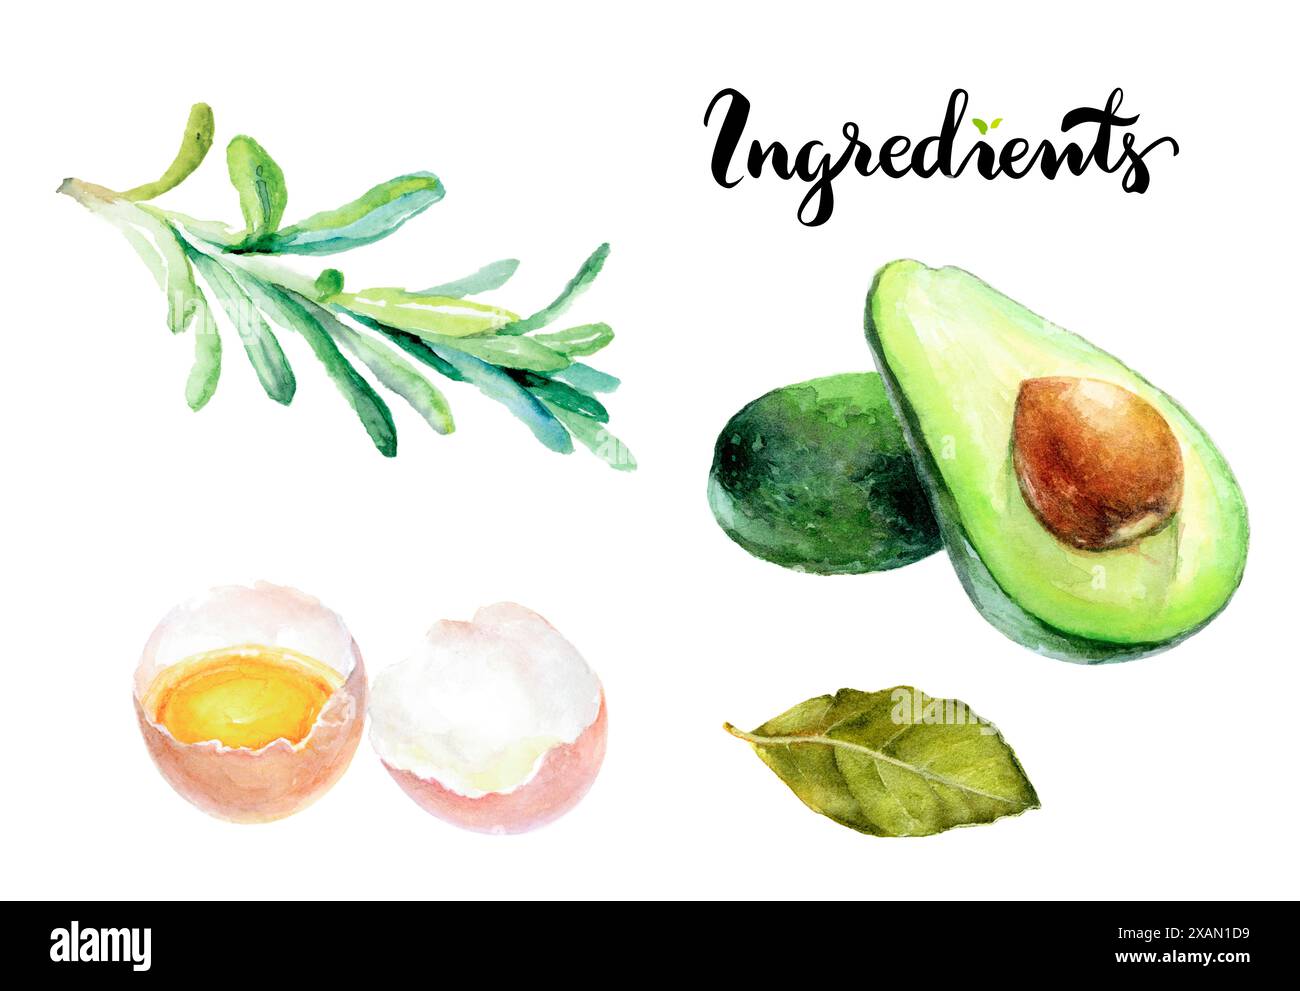 Watercolor illustration of avocado, eggs, rosemary, and bay leaf symbols of fresh and organic ingredients. Stock Photo